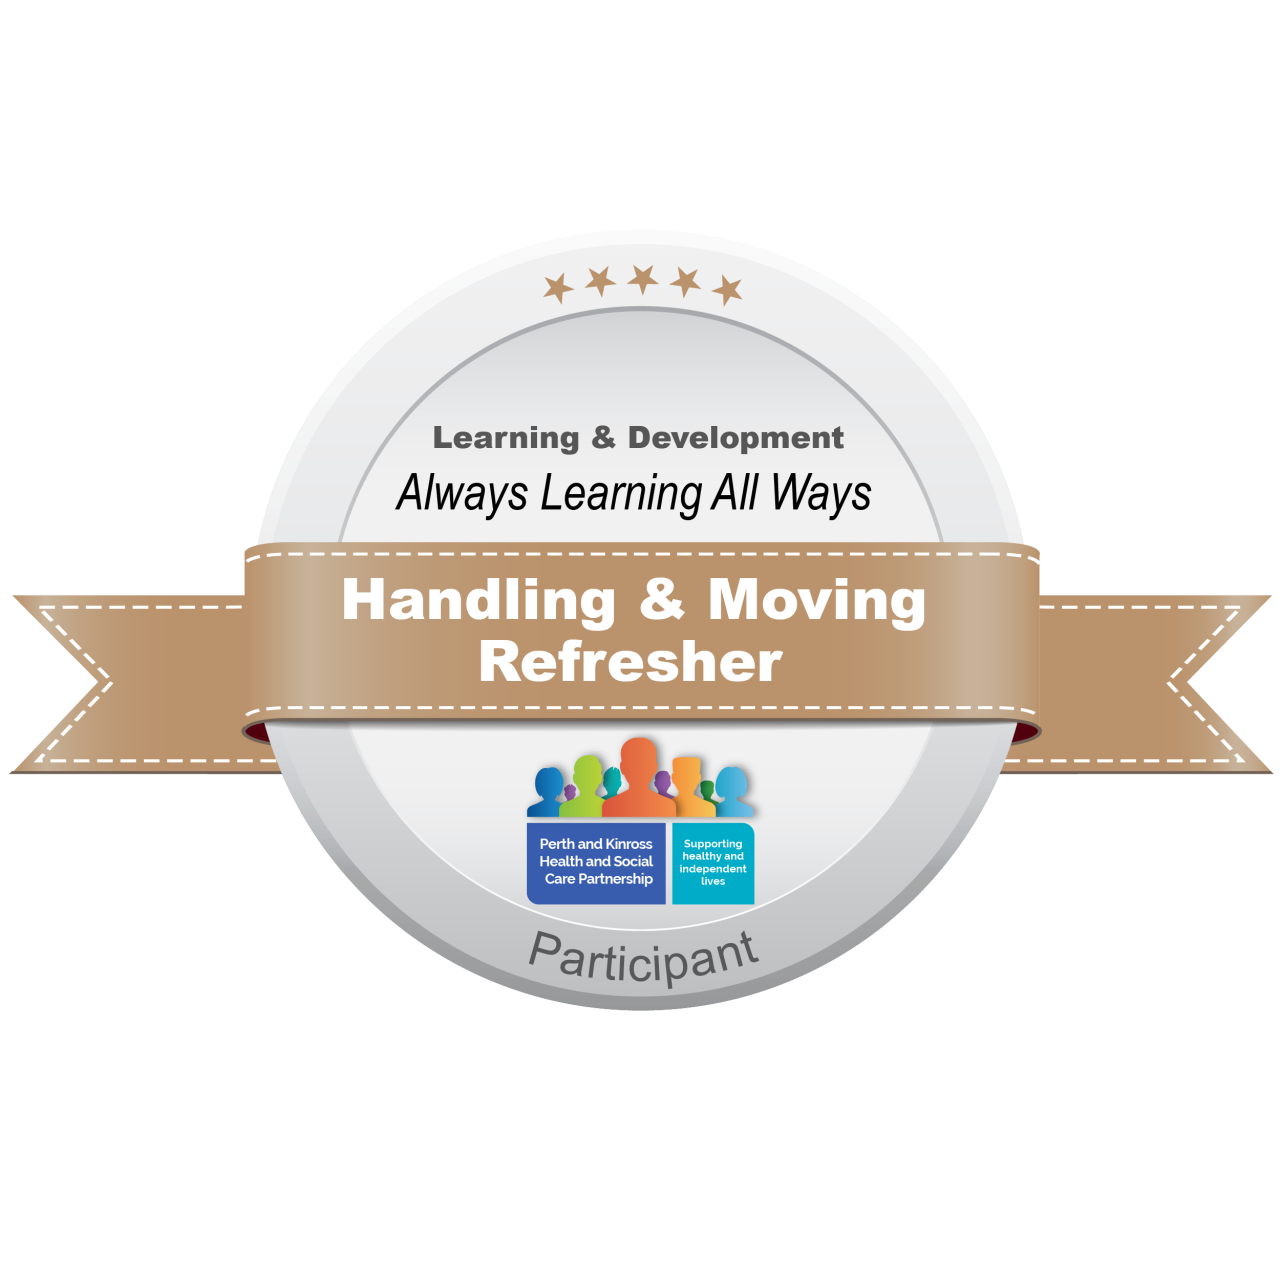 Handling and Moving Refresher - participant